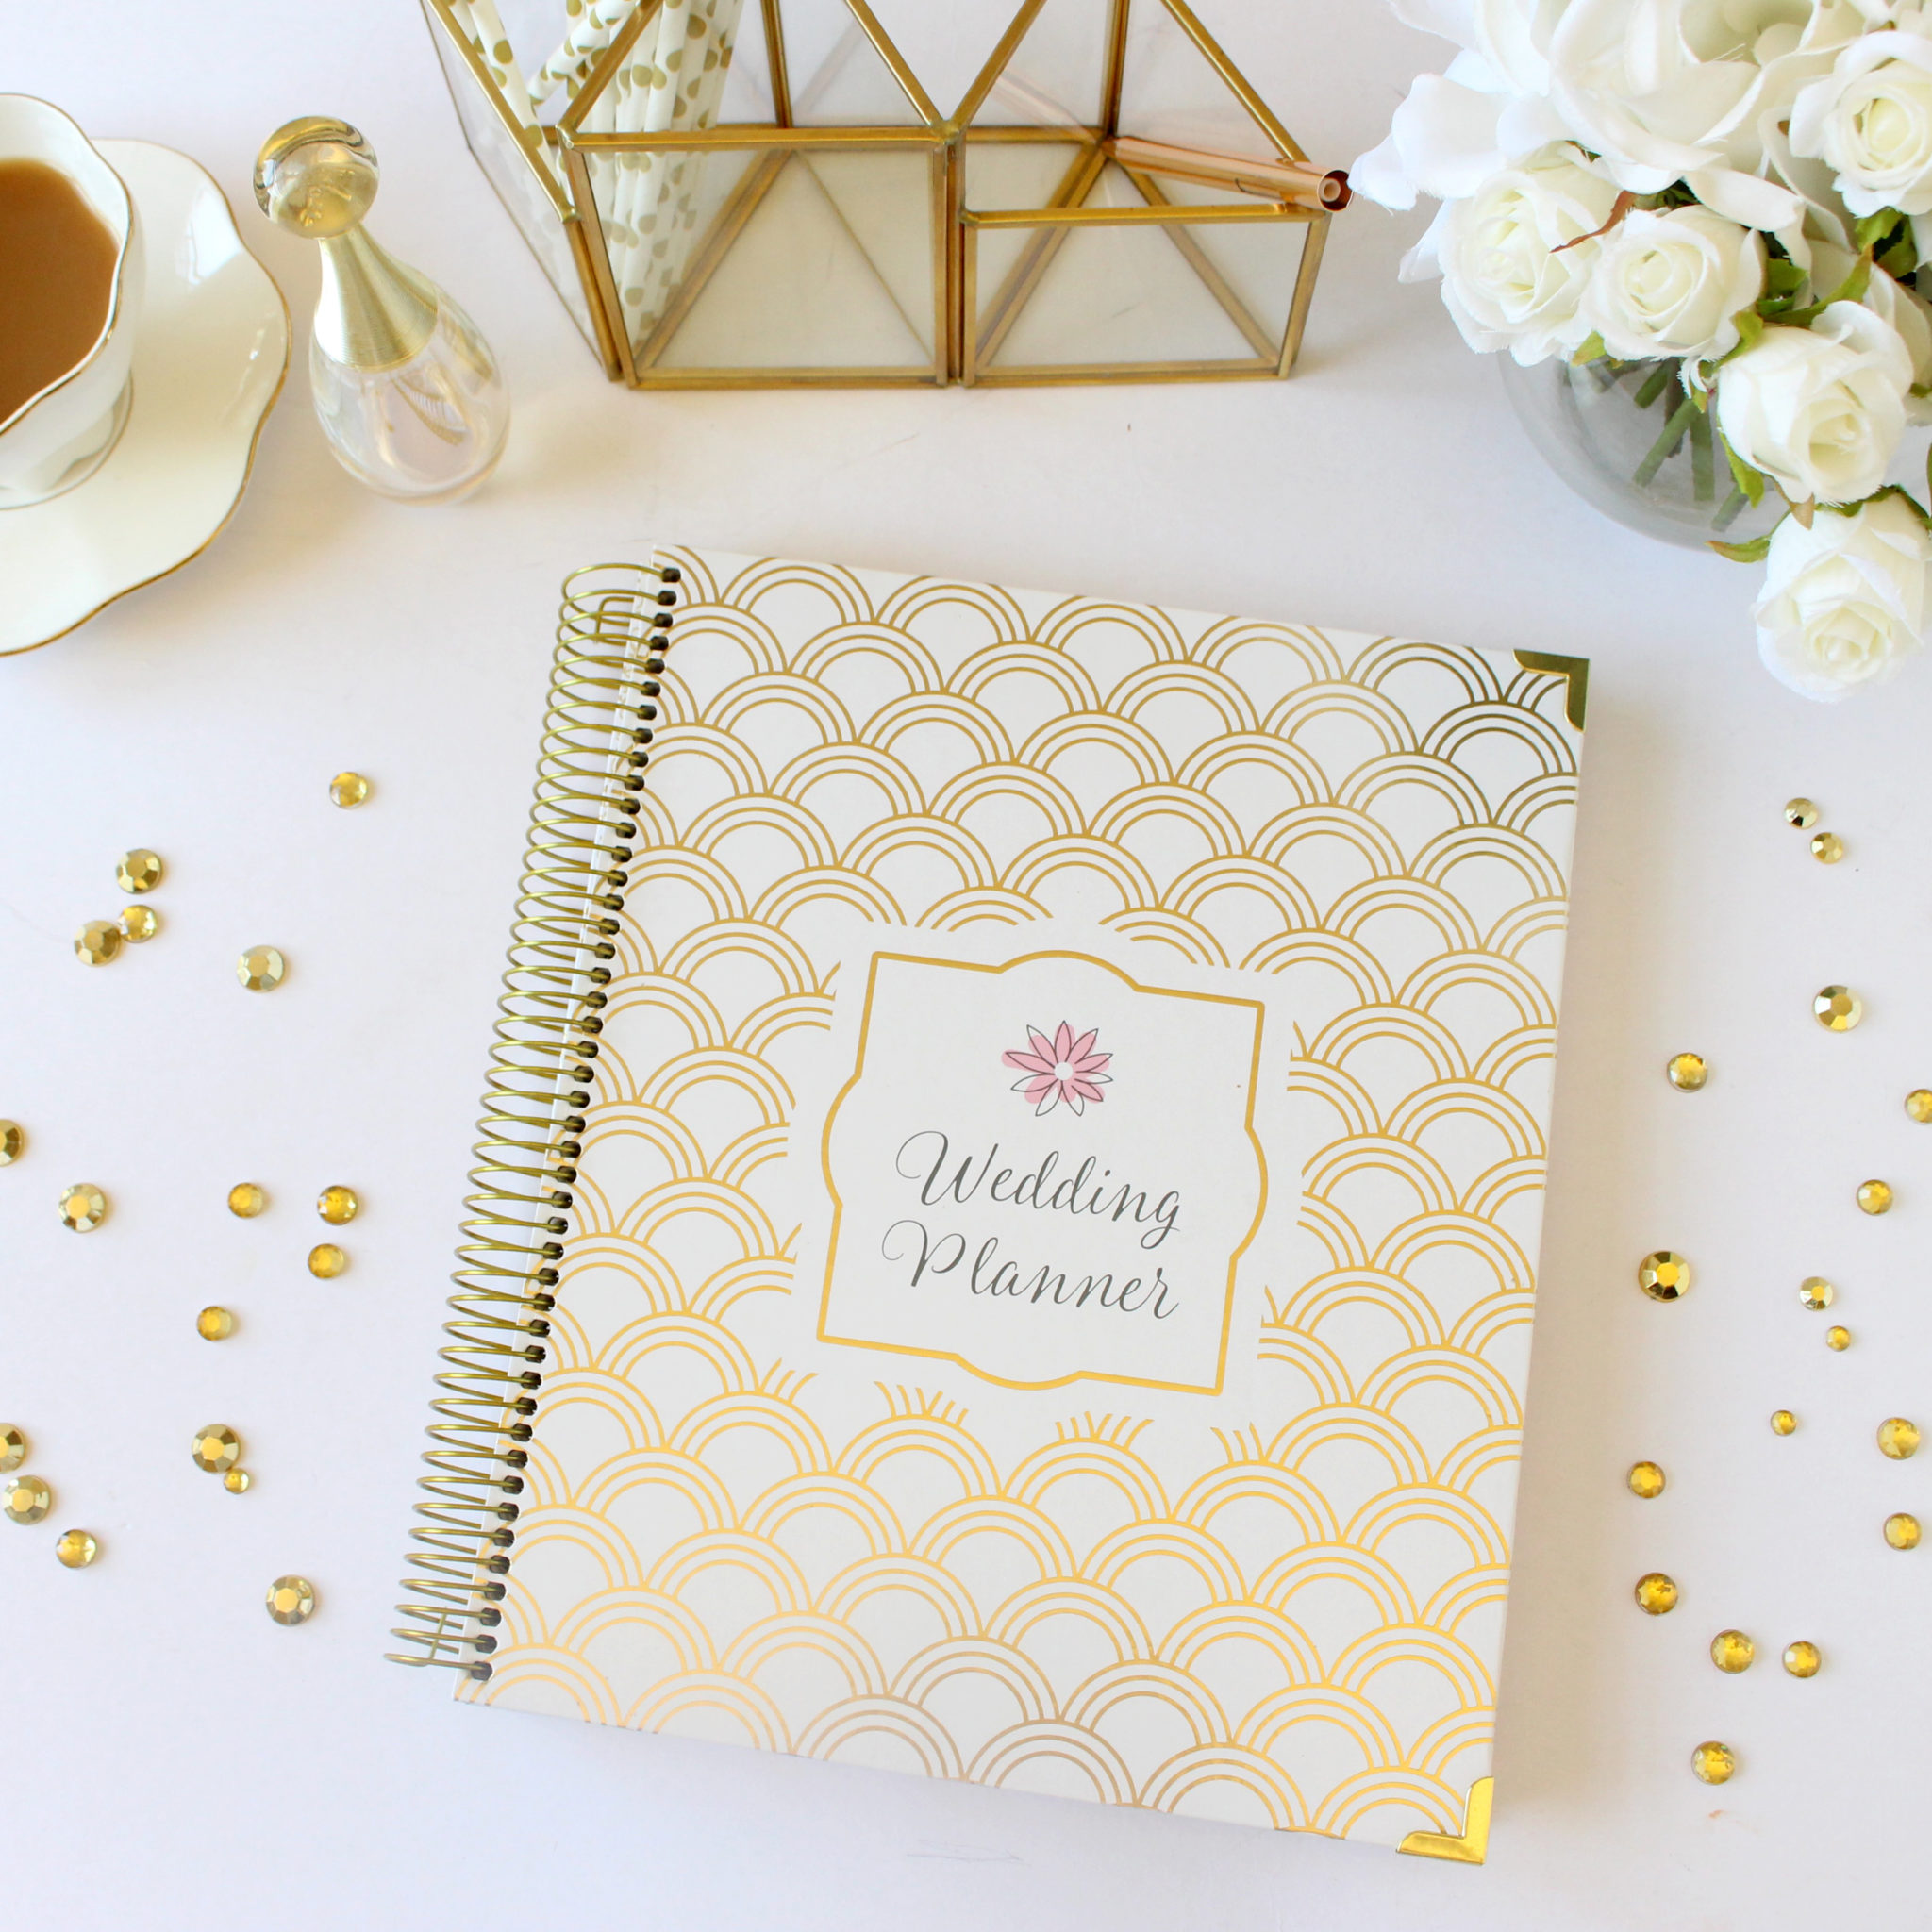 White and gold wedding planning notebook on a white table with a white and gold tea cup and vase of white roses